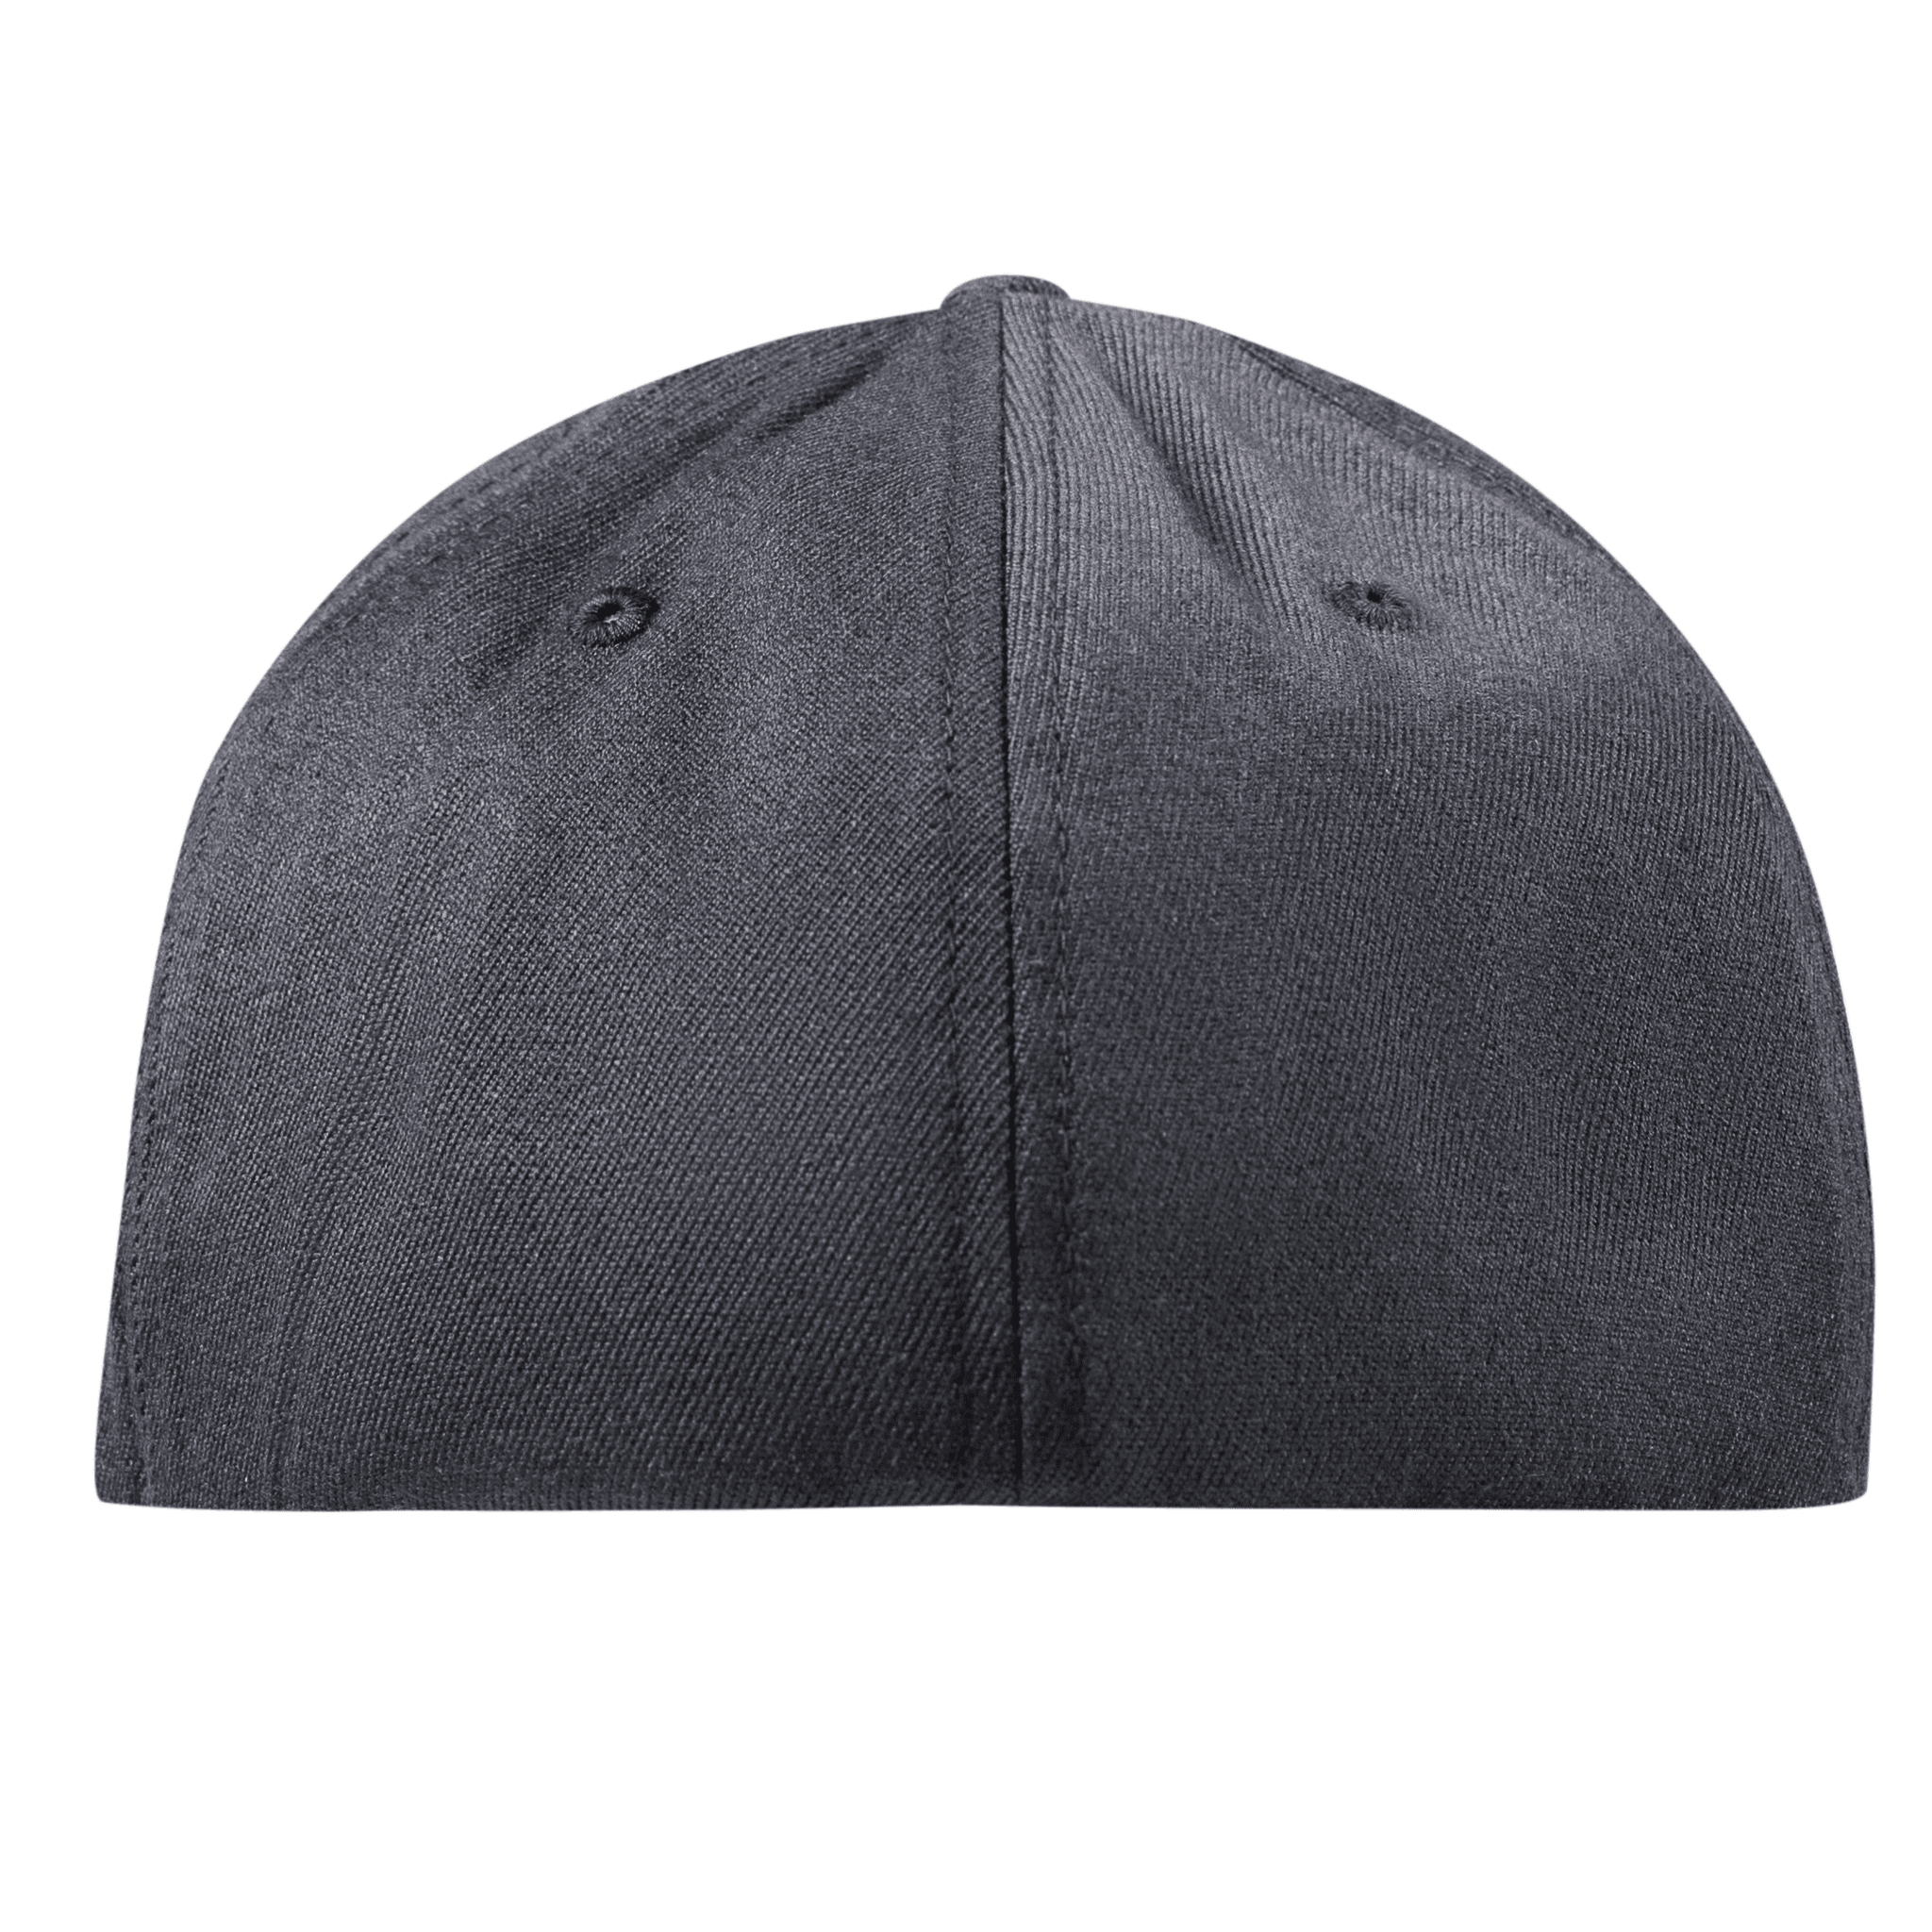 Arkansas 25 Midnight Flexfit Fitted Back Charcoal